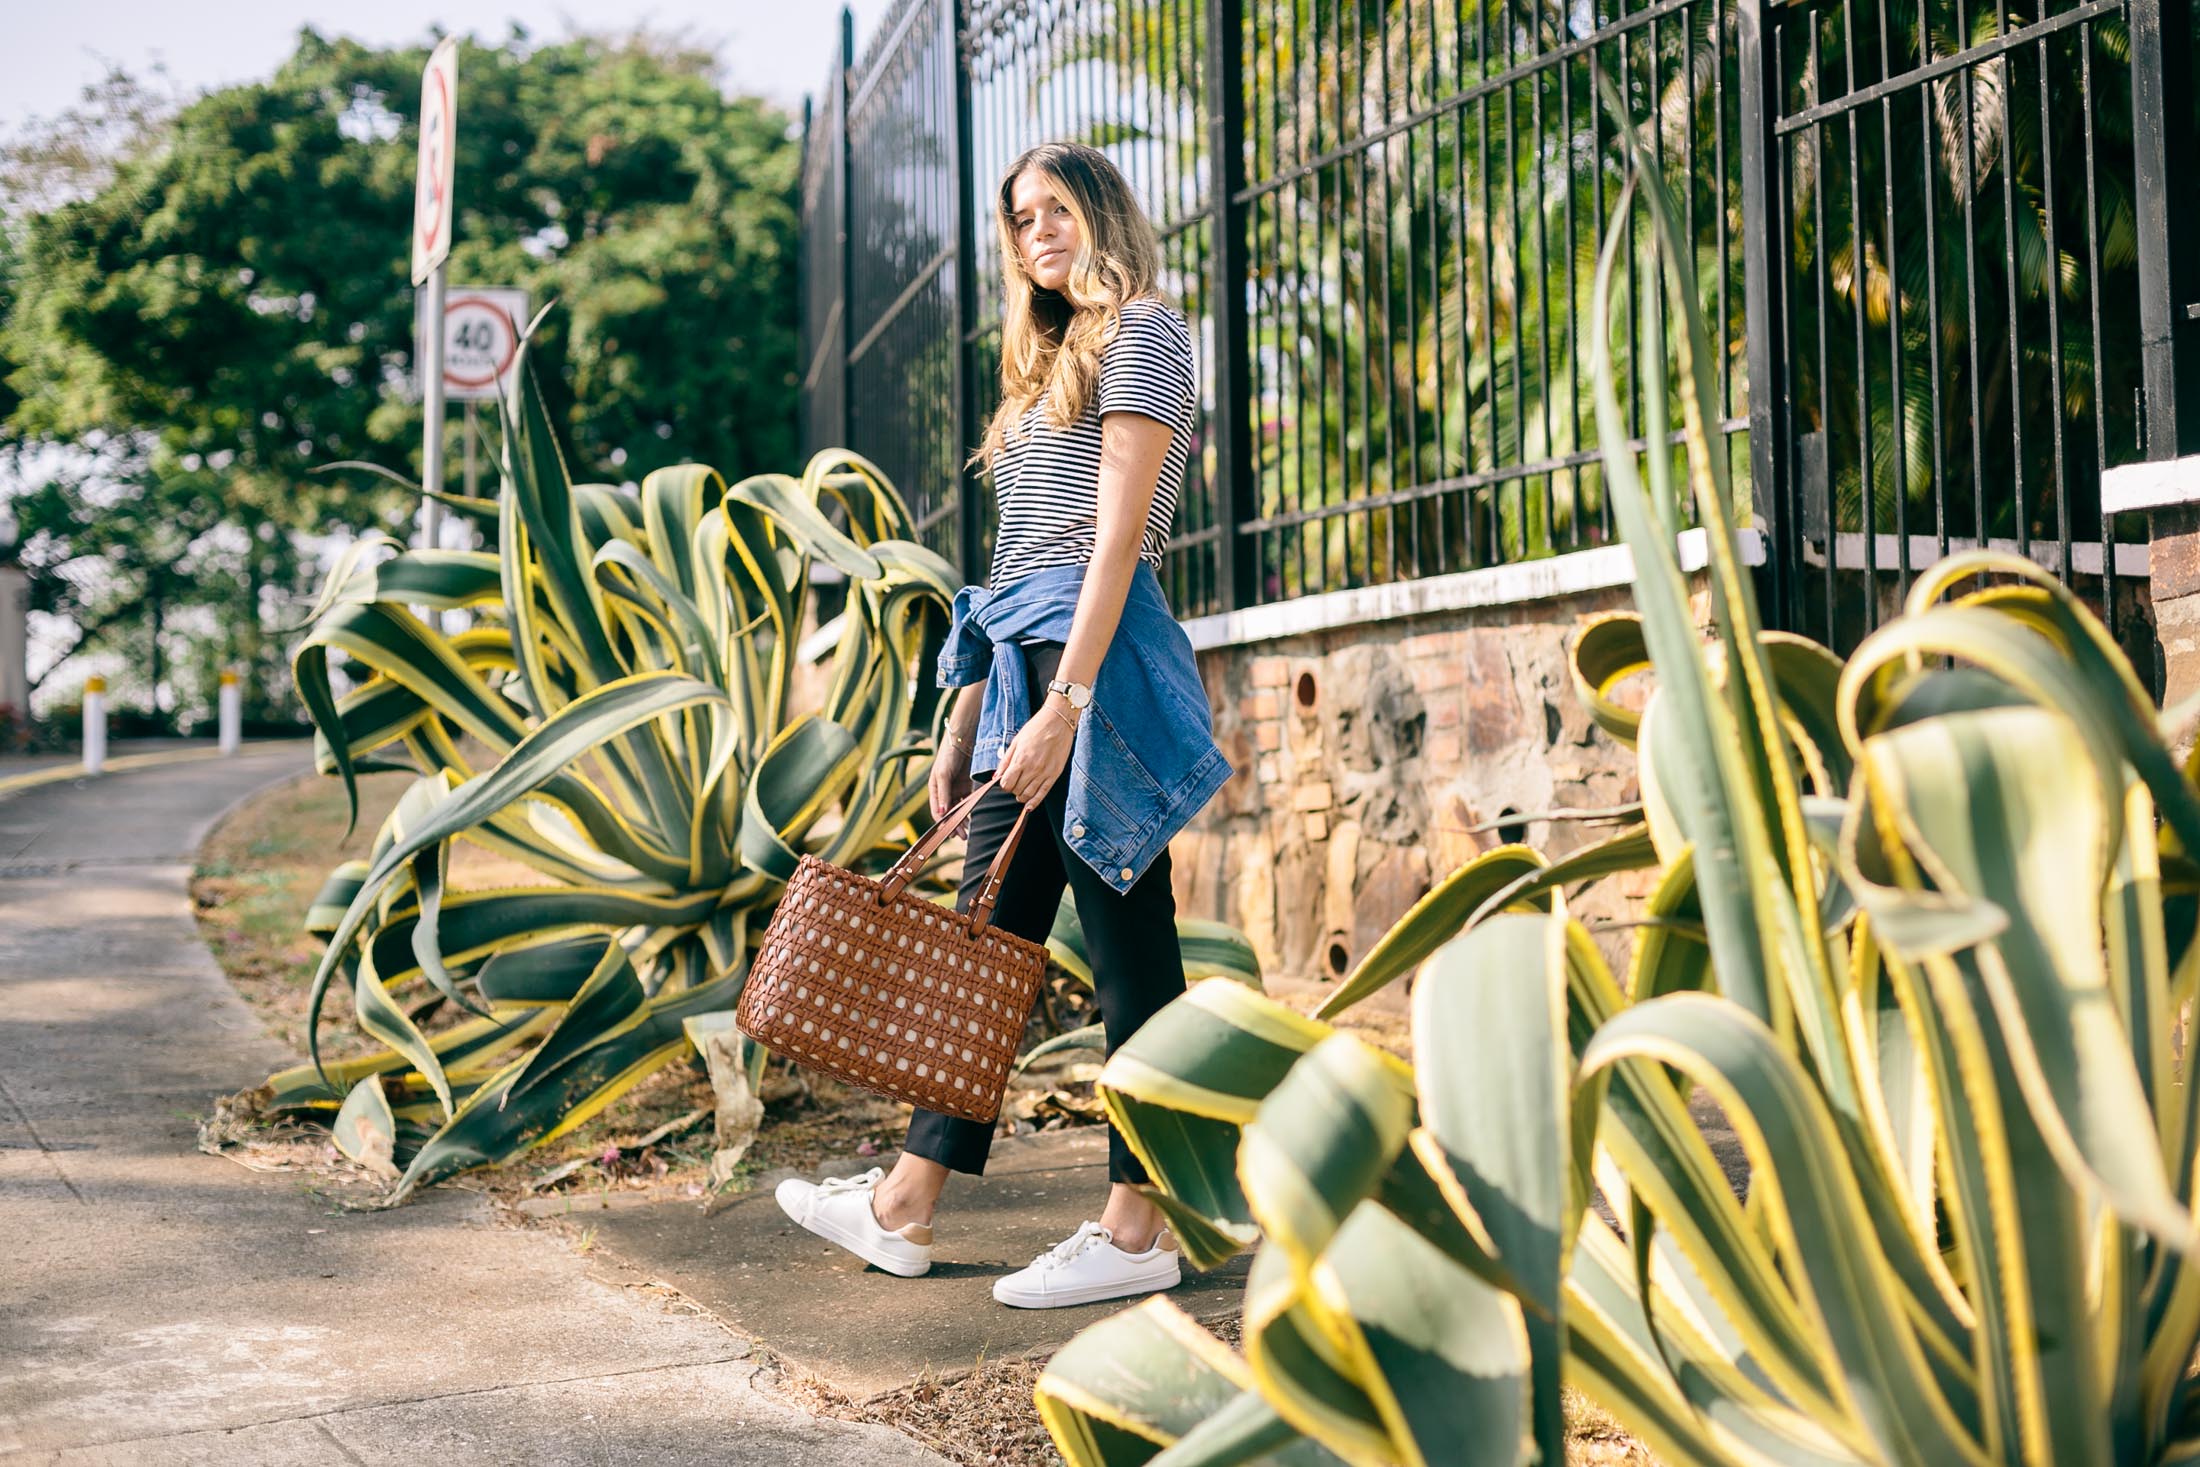 Maristella in a chic effortless everyday outfit with a striped t-shirt, black skinny pants, white sneakers, tan leather tote bag and jean jacket